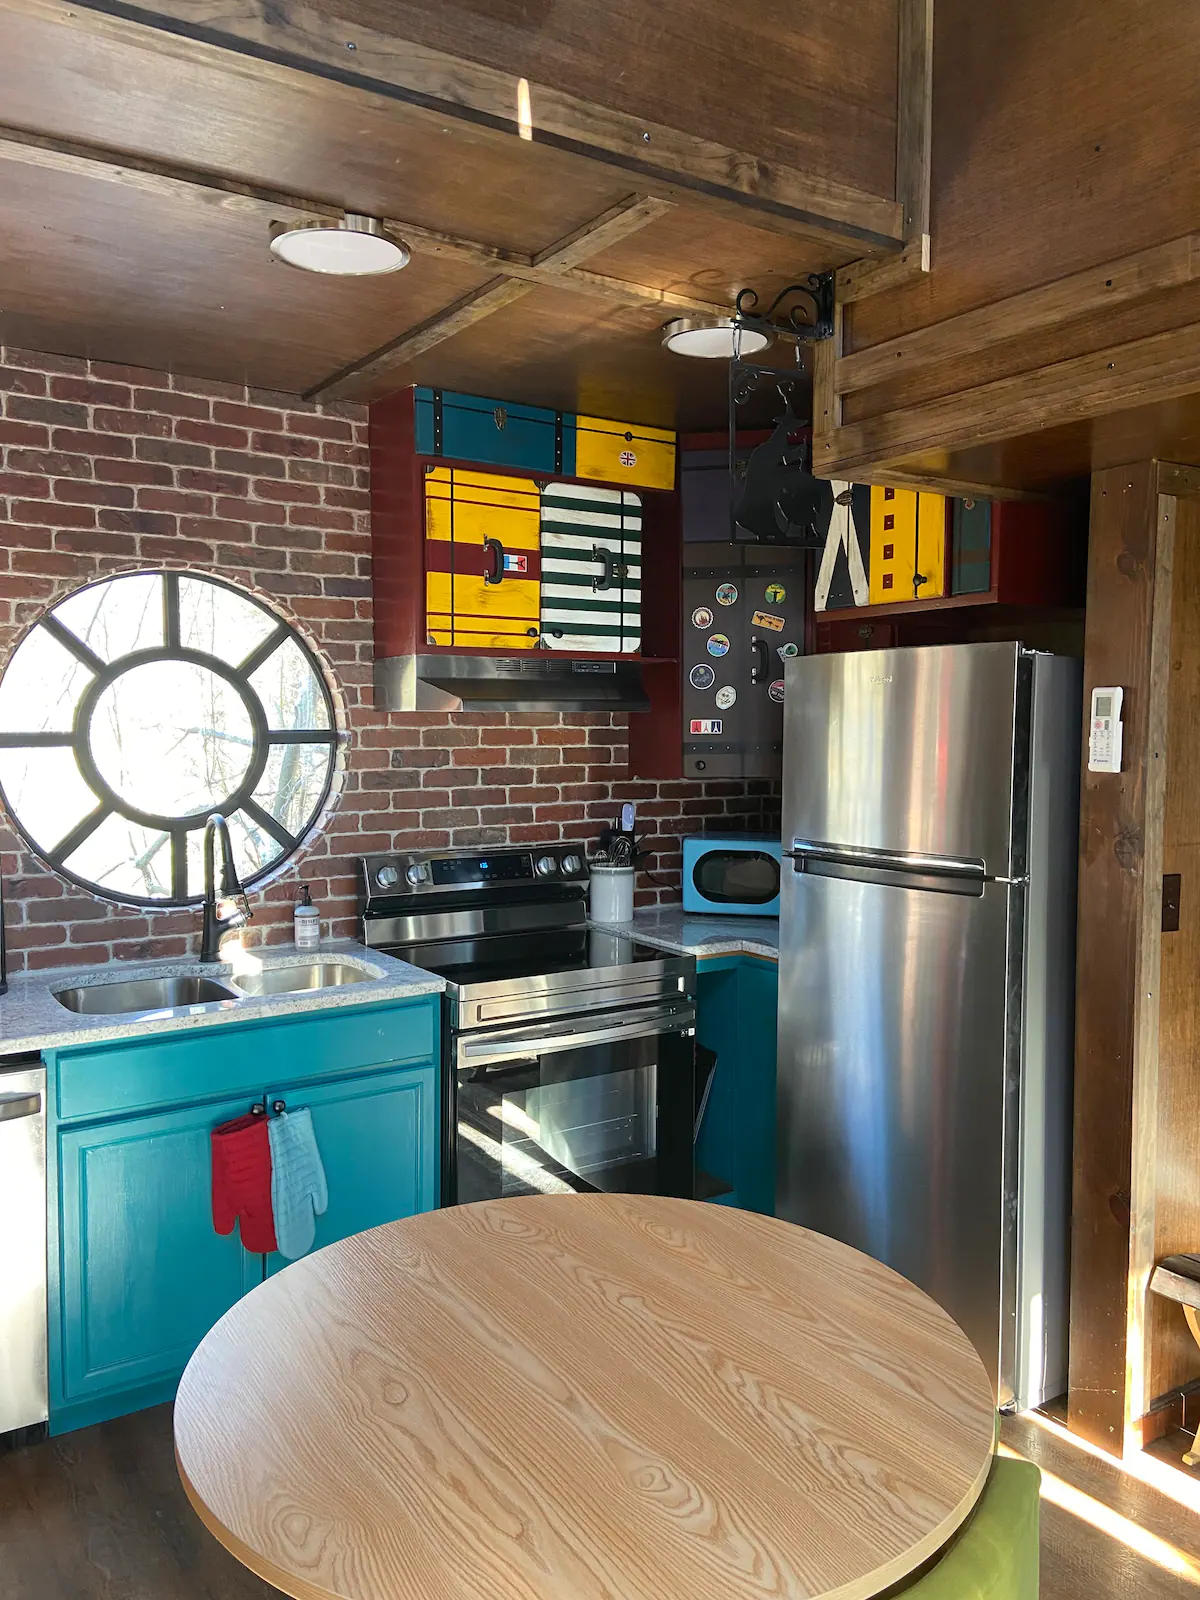 The kitchen includes all full-size appliances and storage.